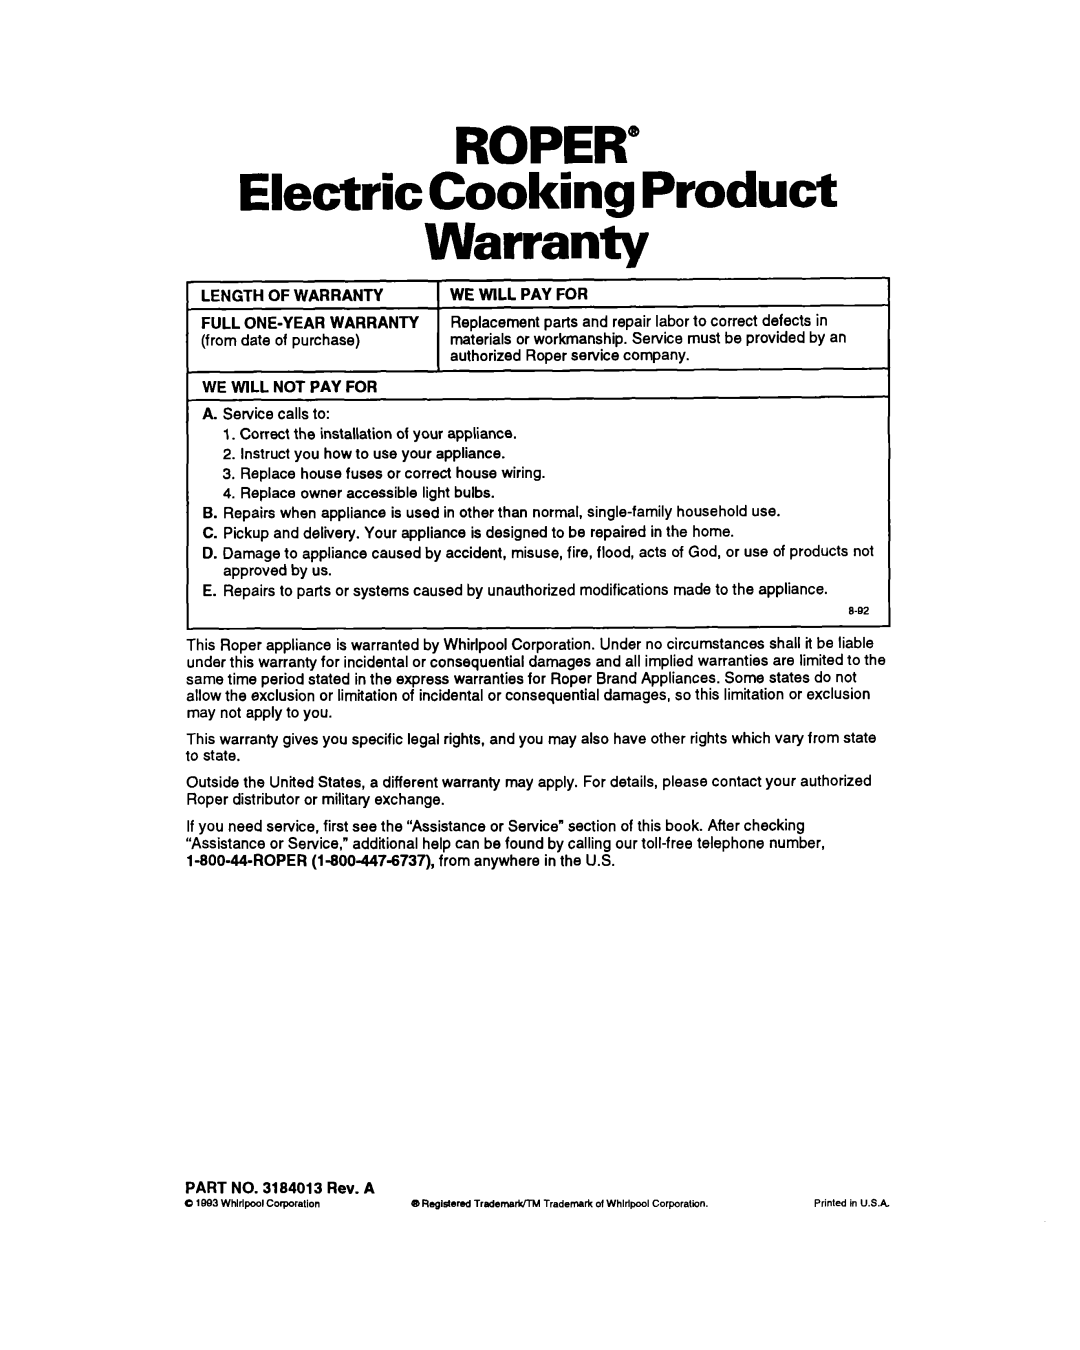 Whirlpool FES310Y manual ROPER Electric Cooking Product Warranty 